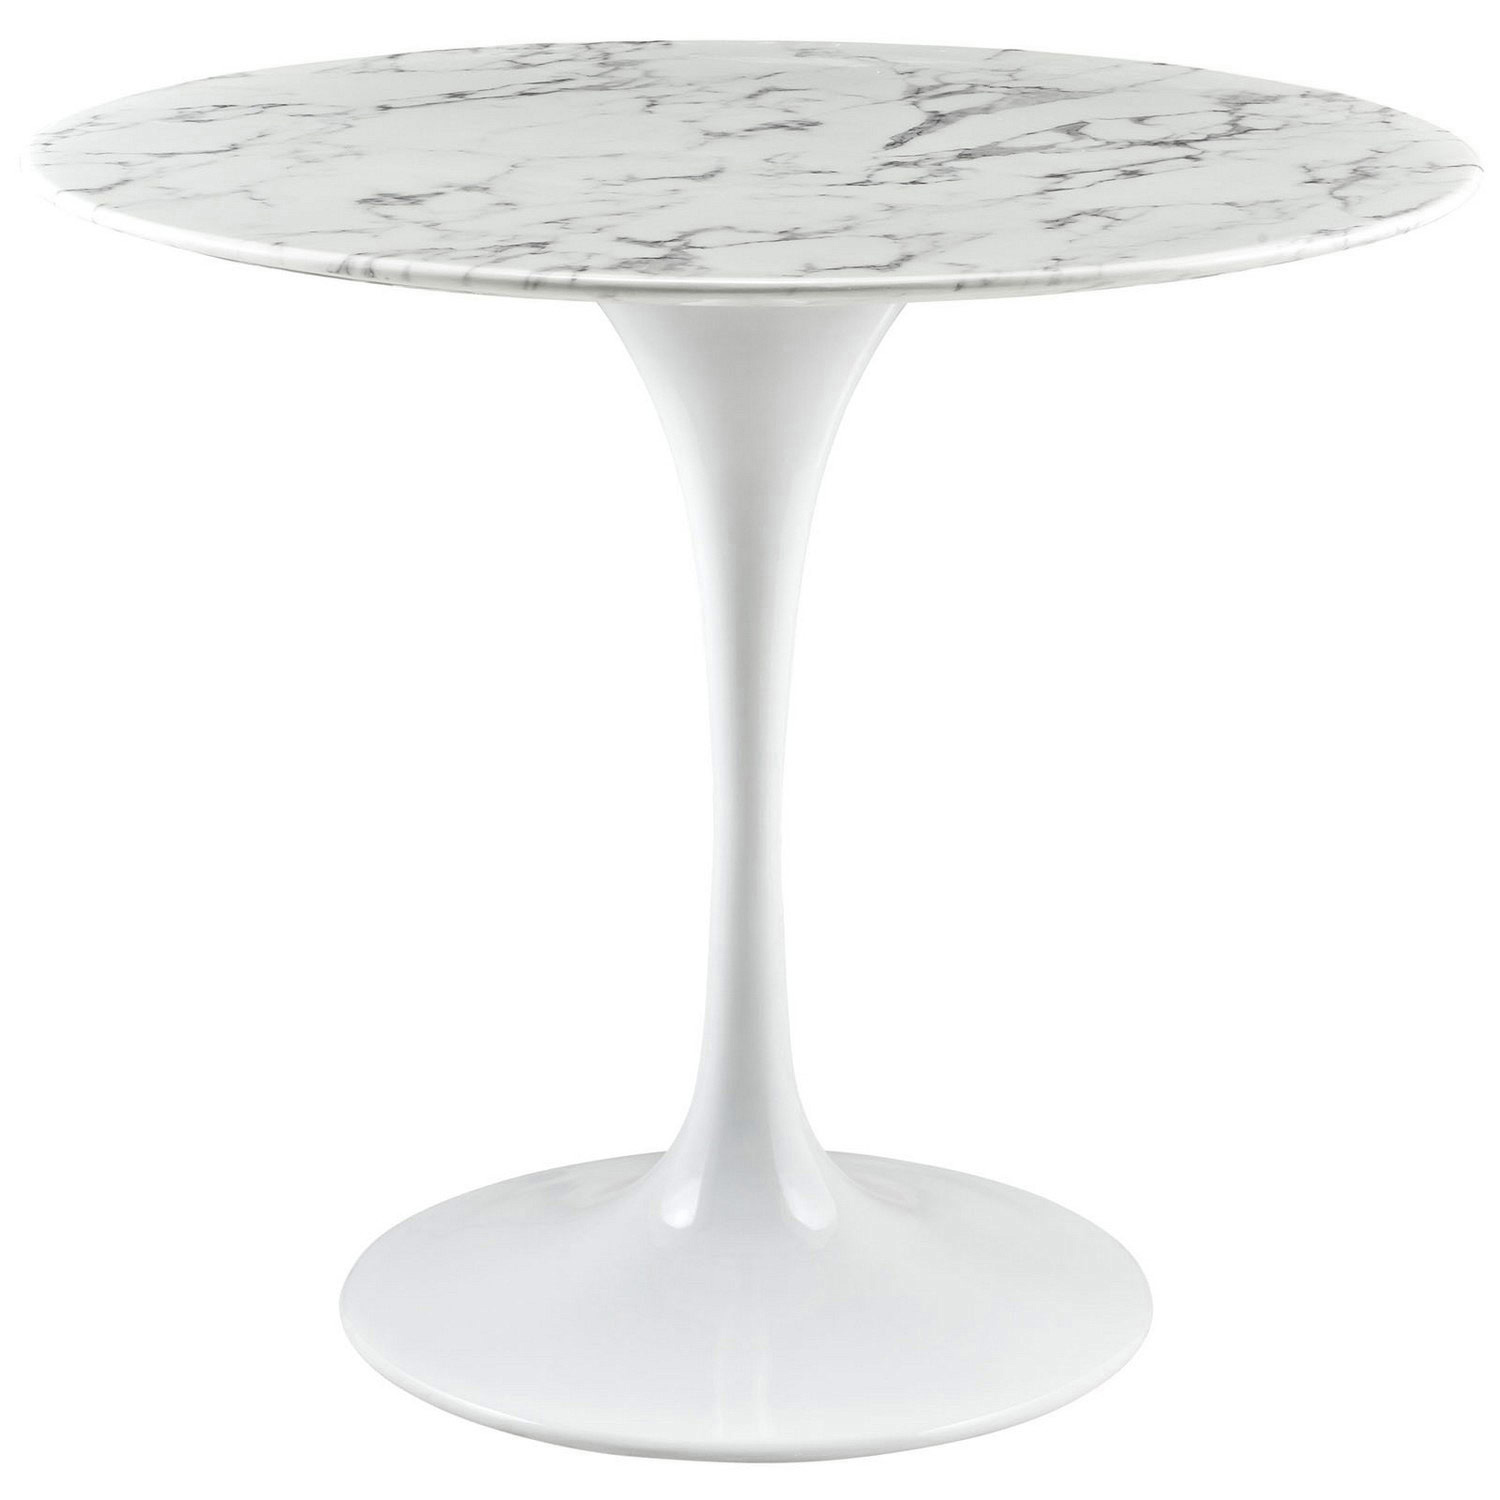 Modway Lippa 36 Artificial Marble Dining Table - White